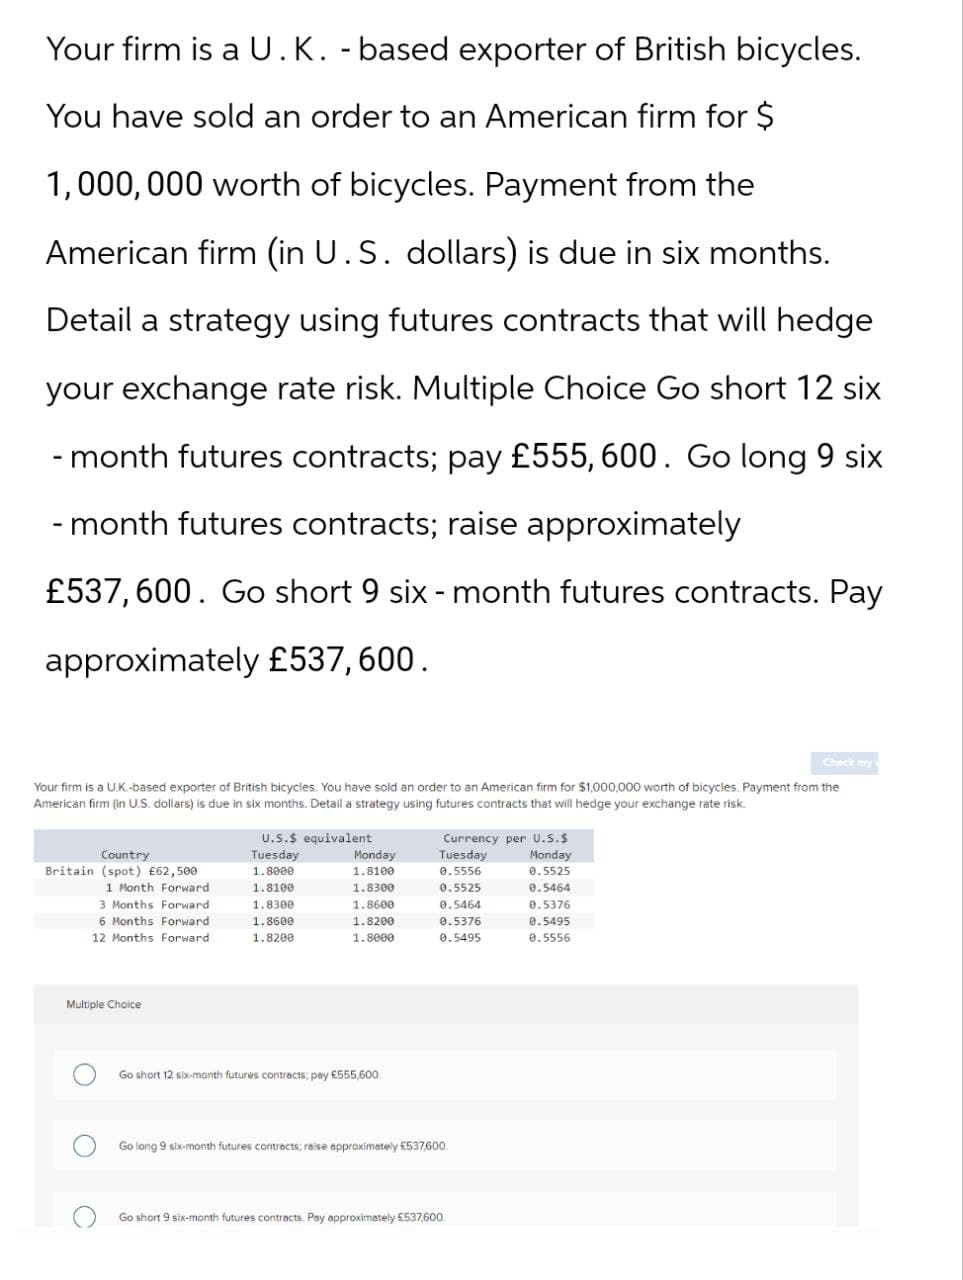 Your firm is a U.K. -based exporter of British bicycles.
You have sold an order to an American firm for $
1,000,000 worth of bicycles. Payment from the
American firm (in U.S. dollars) is due in six months.
Detail a strategy using futures contracts that will hedge
your exchange rate risk. Multiple Choice Go short 12 six
-month futures contracts; pay £555, 600. Go long 9 six
-month futures contracts; raise approximately
£537,600. Go short 9 six-month futures contracts. Pay
approximately £537,600.
Check my
Your firm is a UK-based exporter of British bicycles. You have sold an order to an American firm for $1,000,000 worth of bicycles. Payment from the
American firm (in U.S. dollars) is due in six months. Detail a strategy using futures contracts that will hedge your exchange rate risk.
U.S.$ equivalent
Country
Tuesday
Monday
Currency per U.S.$
Tuesday
Monday
Britain (spot) £62,500
1.8000
1.8100
0.5556
0.5525
1 Month Forward
1.8100
1.8300
0.5525
0.5464
3 Months Forward
1.8300
1.8600
0.5464
0.5376
6 Months Forward
1.8600
1.8200
0.5376
0.5495
12 Months Forward
1.8200
1.8000
0.5495
0.5556
Multiple Choice
Go short 12 six-month futures contracts; pay £555,600.
Go long 9 six-month futures contracts; raise approximately £537,600.
Go short 9 six-month futures contracts. Pay approximately £537,600.